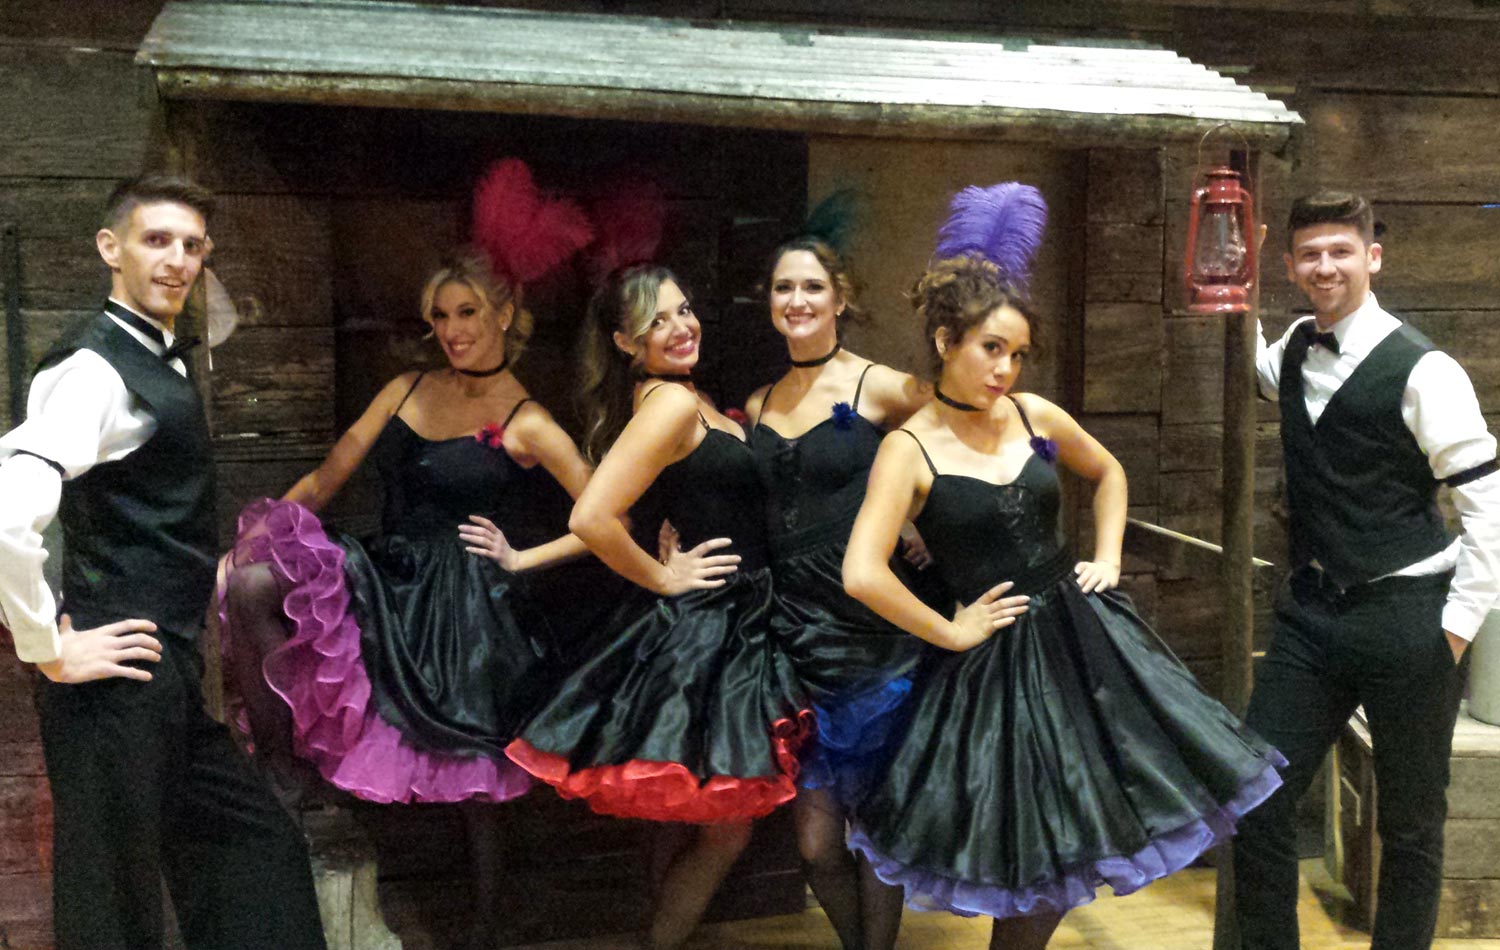 Saloon Girls, Cancan Dancers, Western Revue, and Wild West Cowboy Entertainment